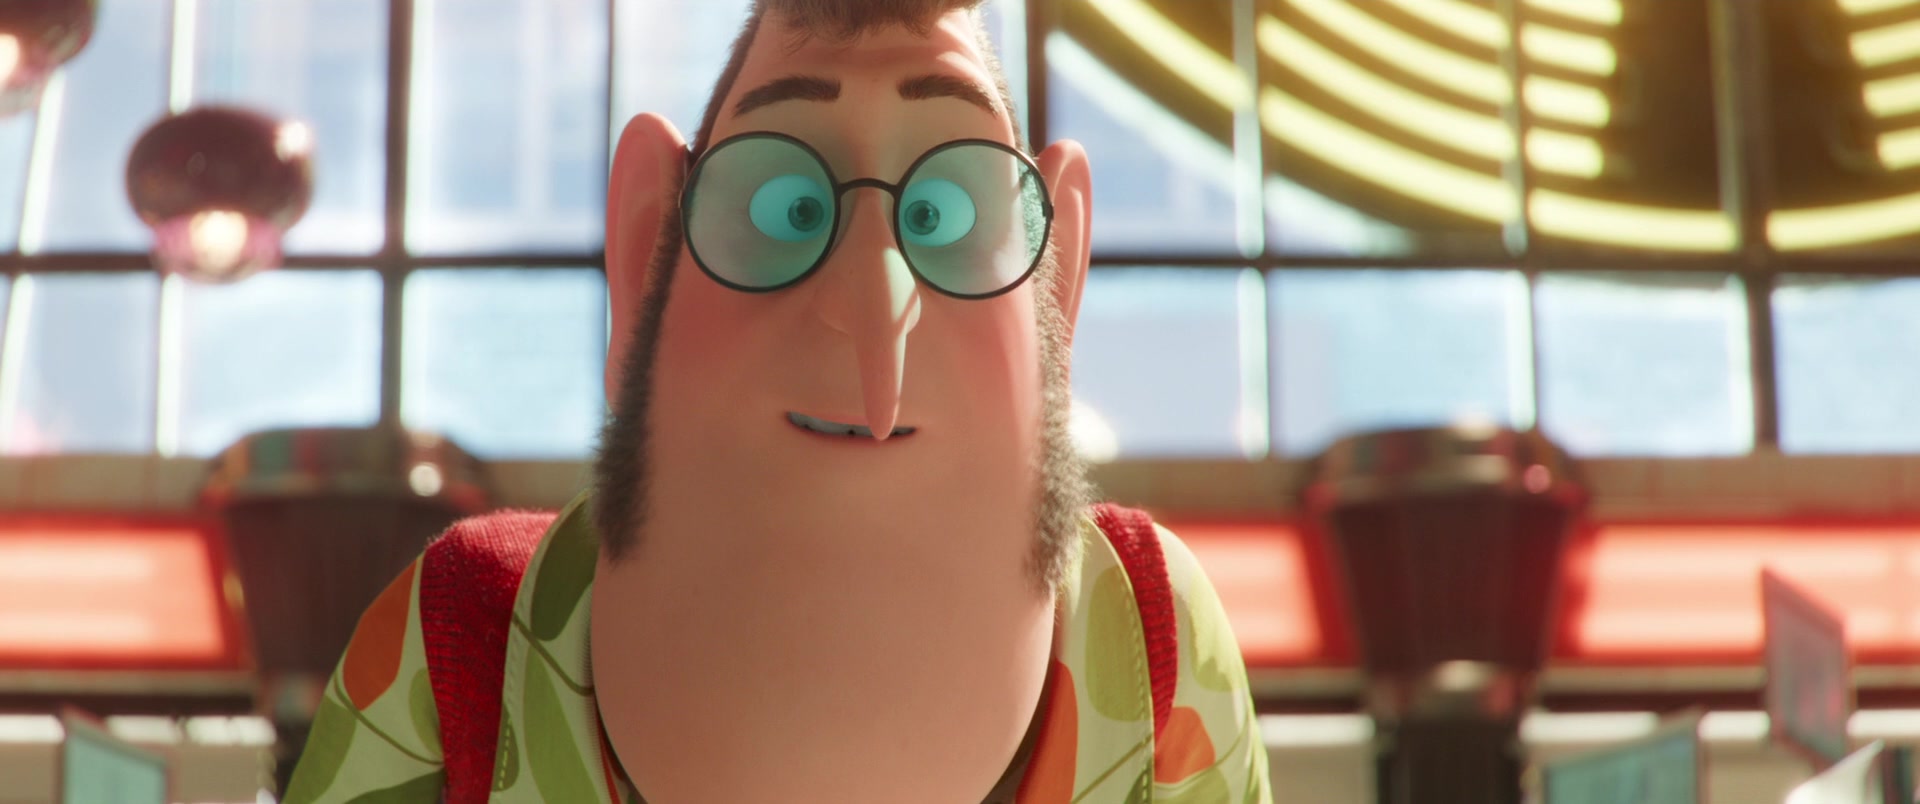 Dr. Nefario (Russell Brand) attempts to keep Gru (Steve Carrell) from barging in on The Vicious Six in Minions: The Rise of Gru (2022), Illumination